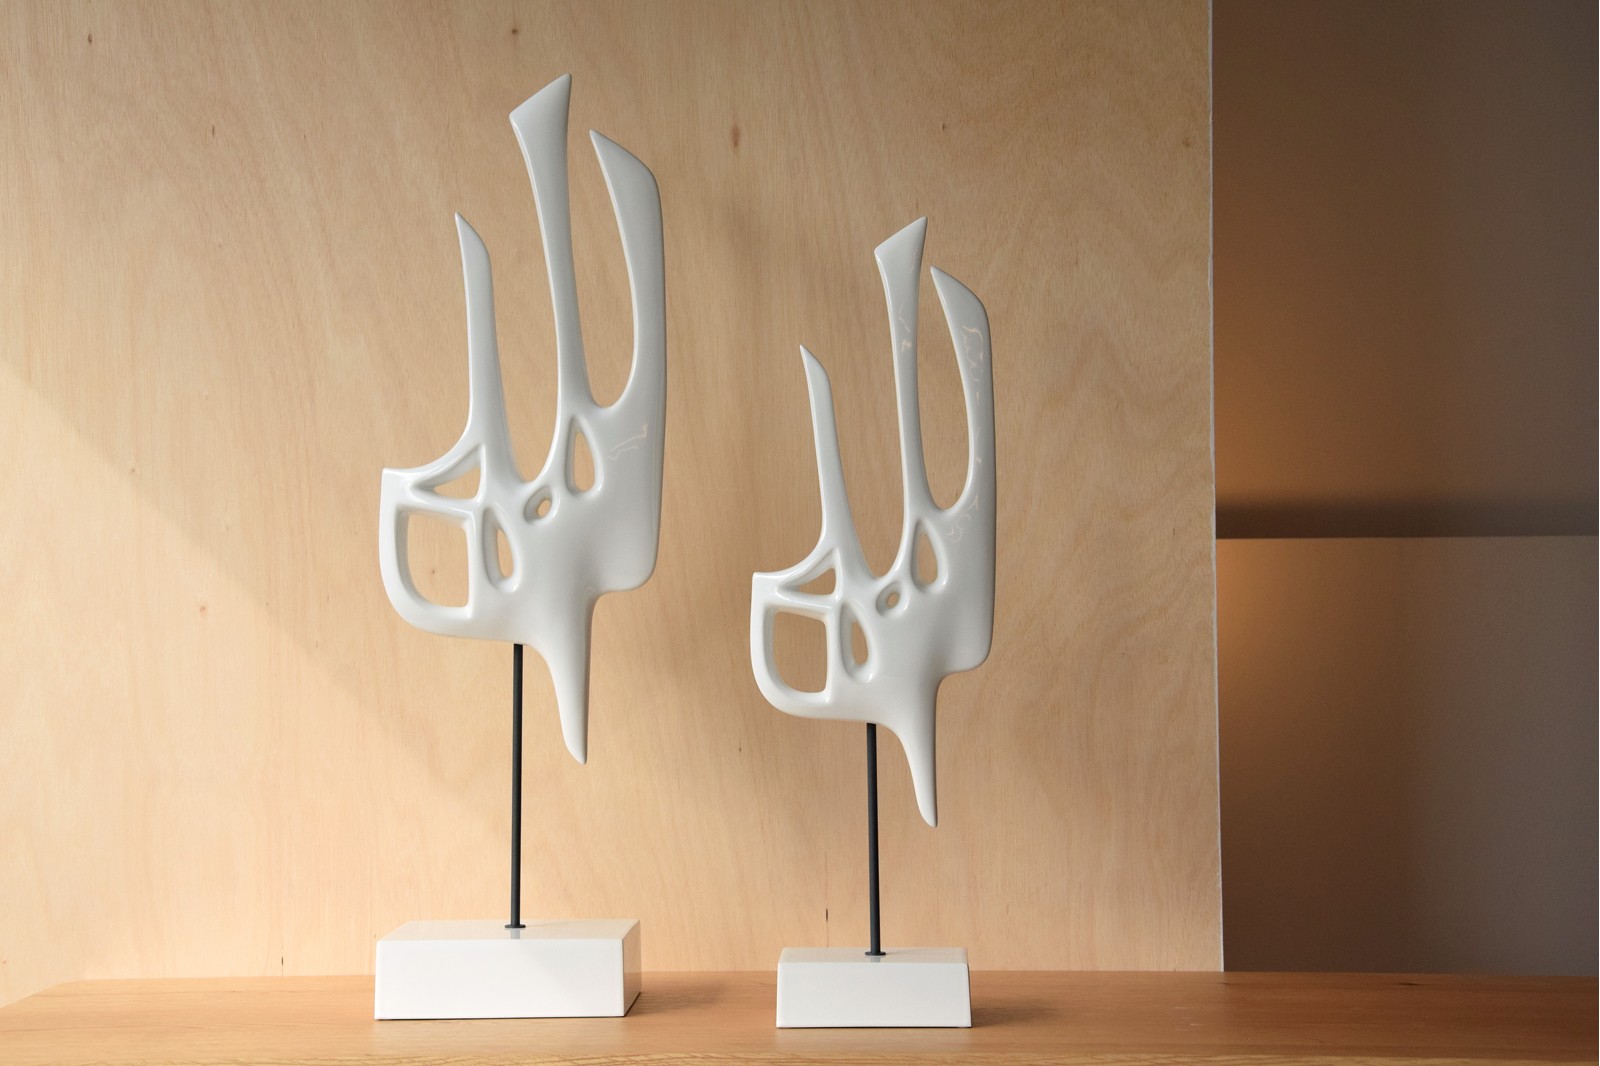 ABSTRACT BIRD COLLECTION. GLOSS WHITE CERAMIC SCULPTURE